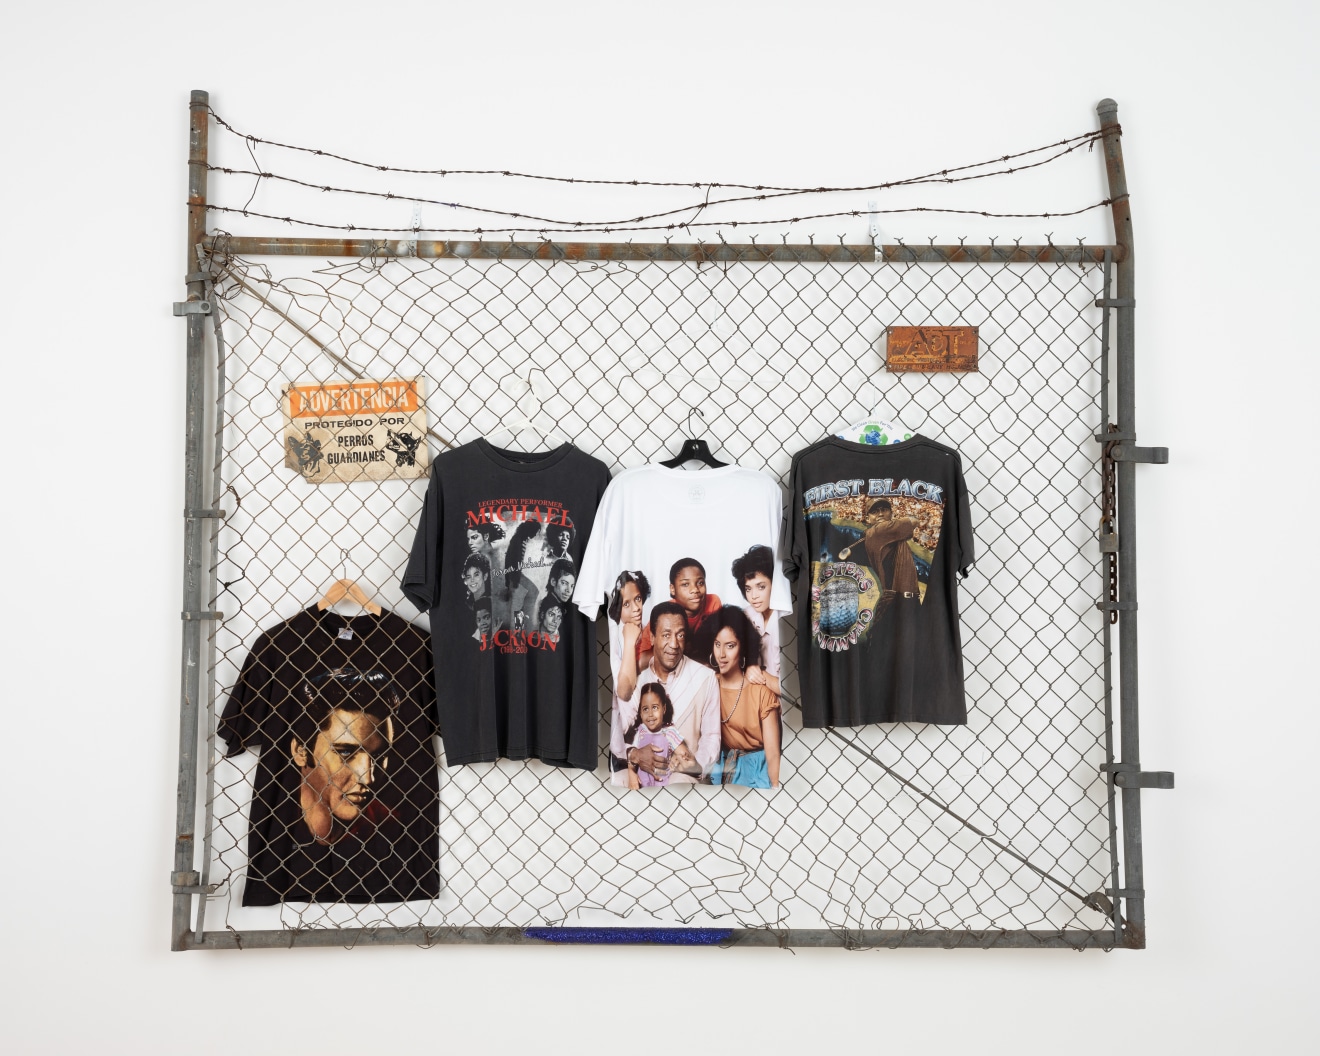 So many clothes I ran out of hangers (Black,&nbsp;White &amp;amp; Grass),&nbsp;2019, Metal fence with barbed wire, assorted tees on hangers